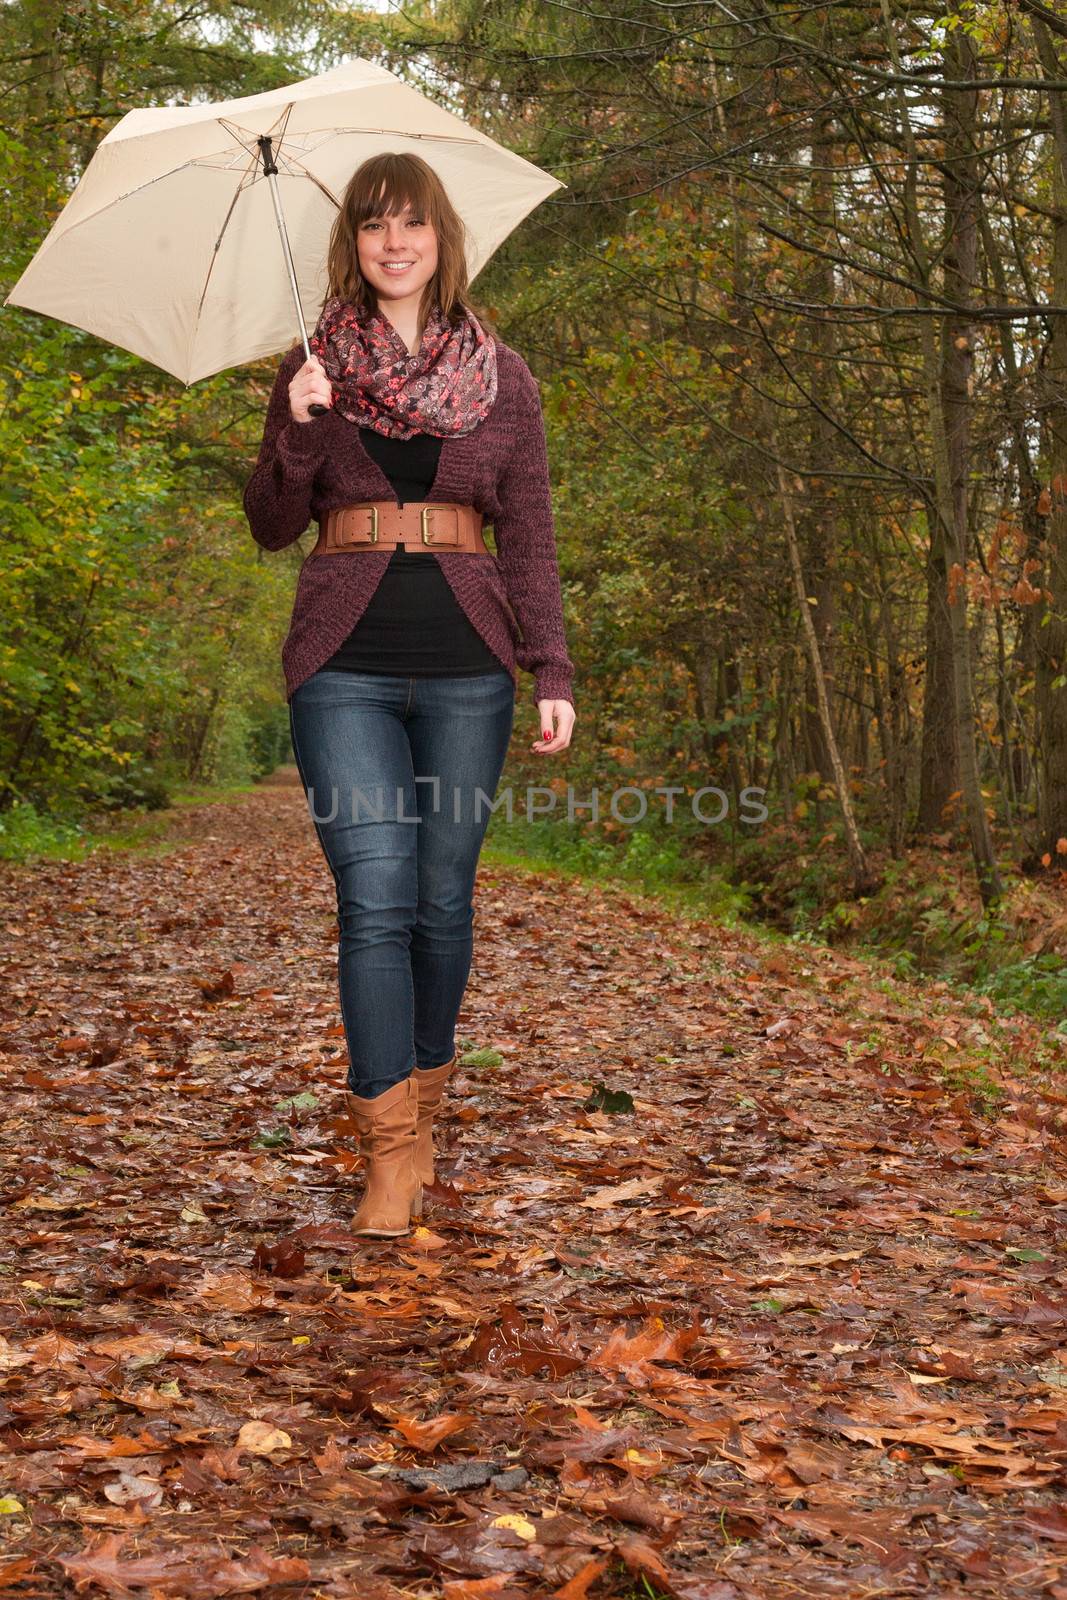 Walking in the park with an umbrella by DNFStyle